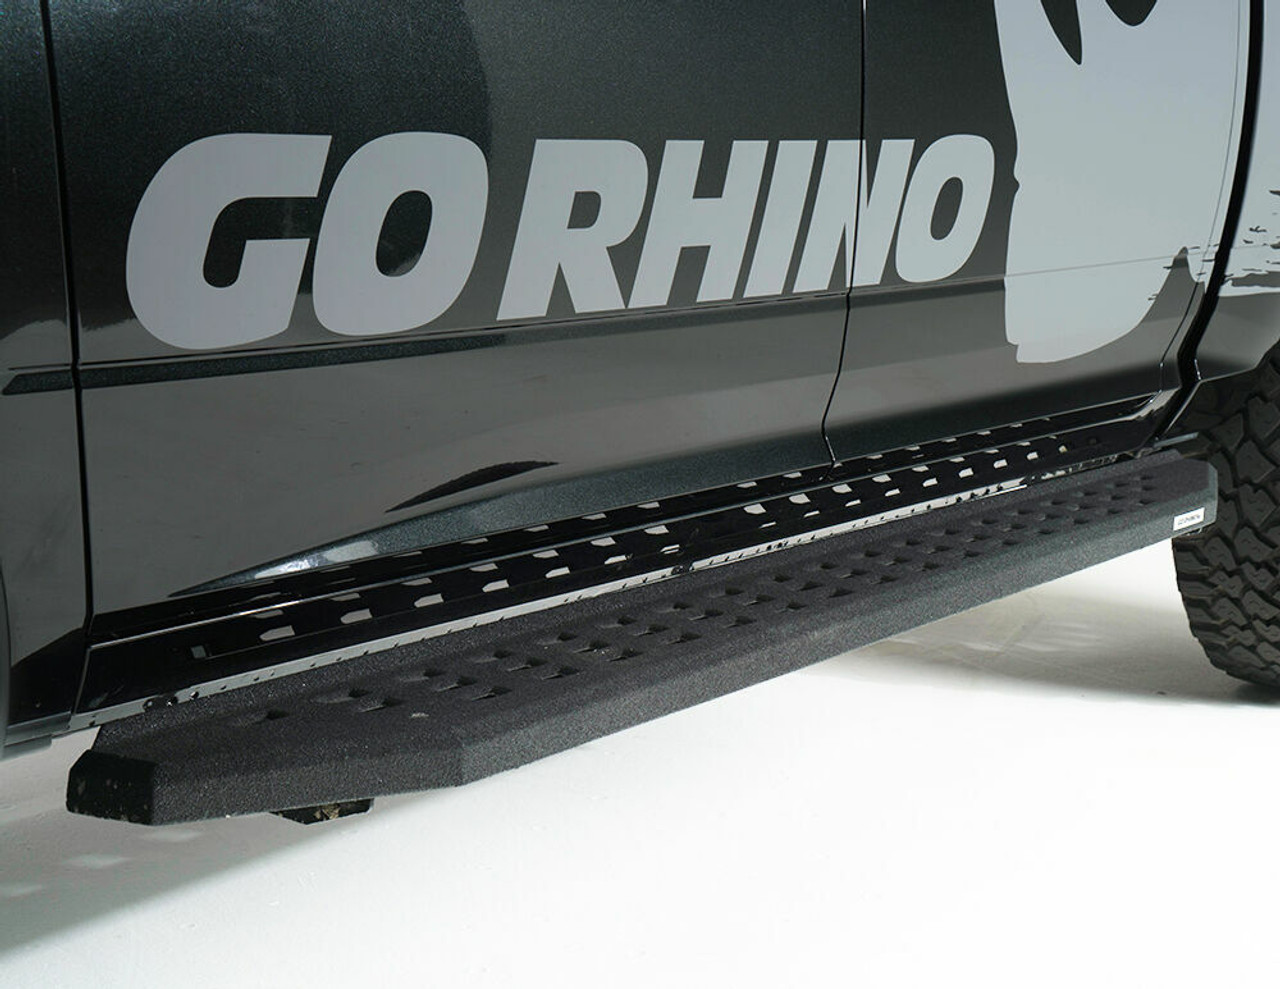 Go Rhino 69404887PC Chevrolet, Silverado 2500HD, 3500HD, 2020 - 2021, RB20 Running boards - Complete Kit: RB20 Running boards + Brackets, Galvanized Steel, Textured black, 69400087PC RB20 + 6940485 RB Brackets, New Body Style Only